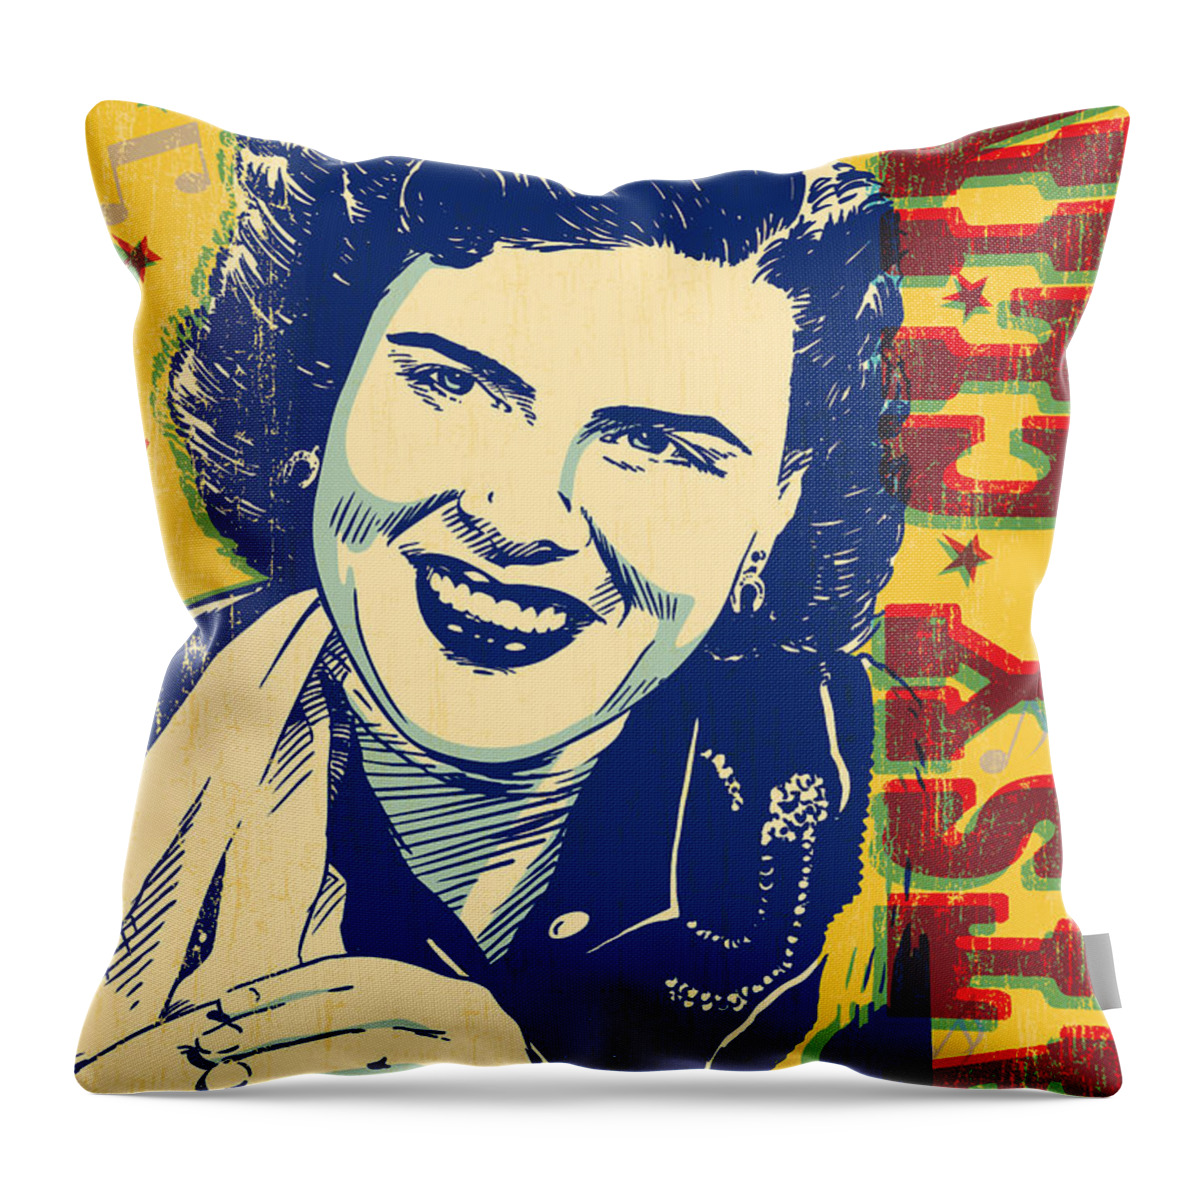 Country And Western Throw Pillow featuring the digital art Patsy Cline Pop Art by Jim Zahniser